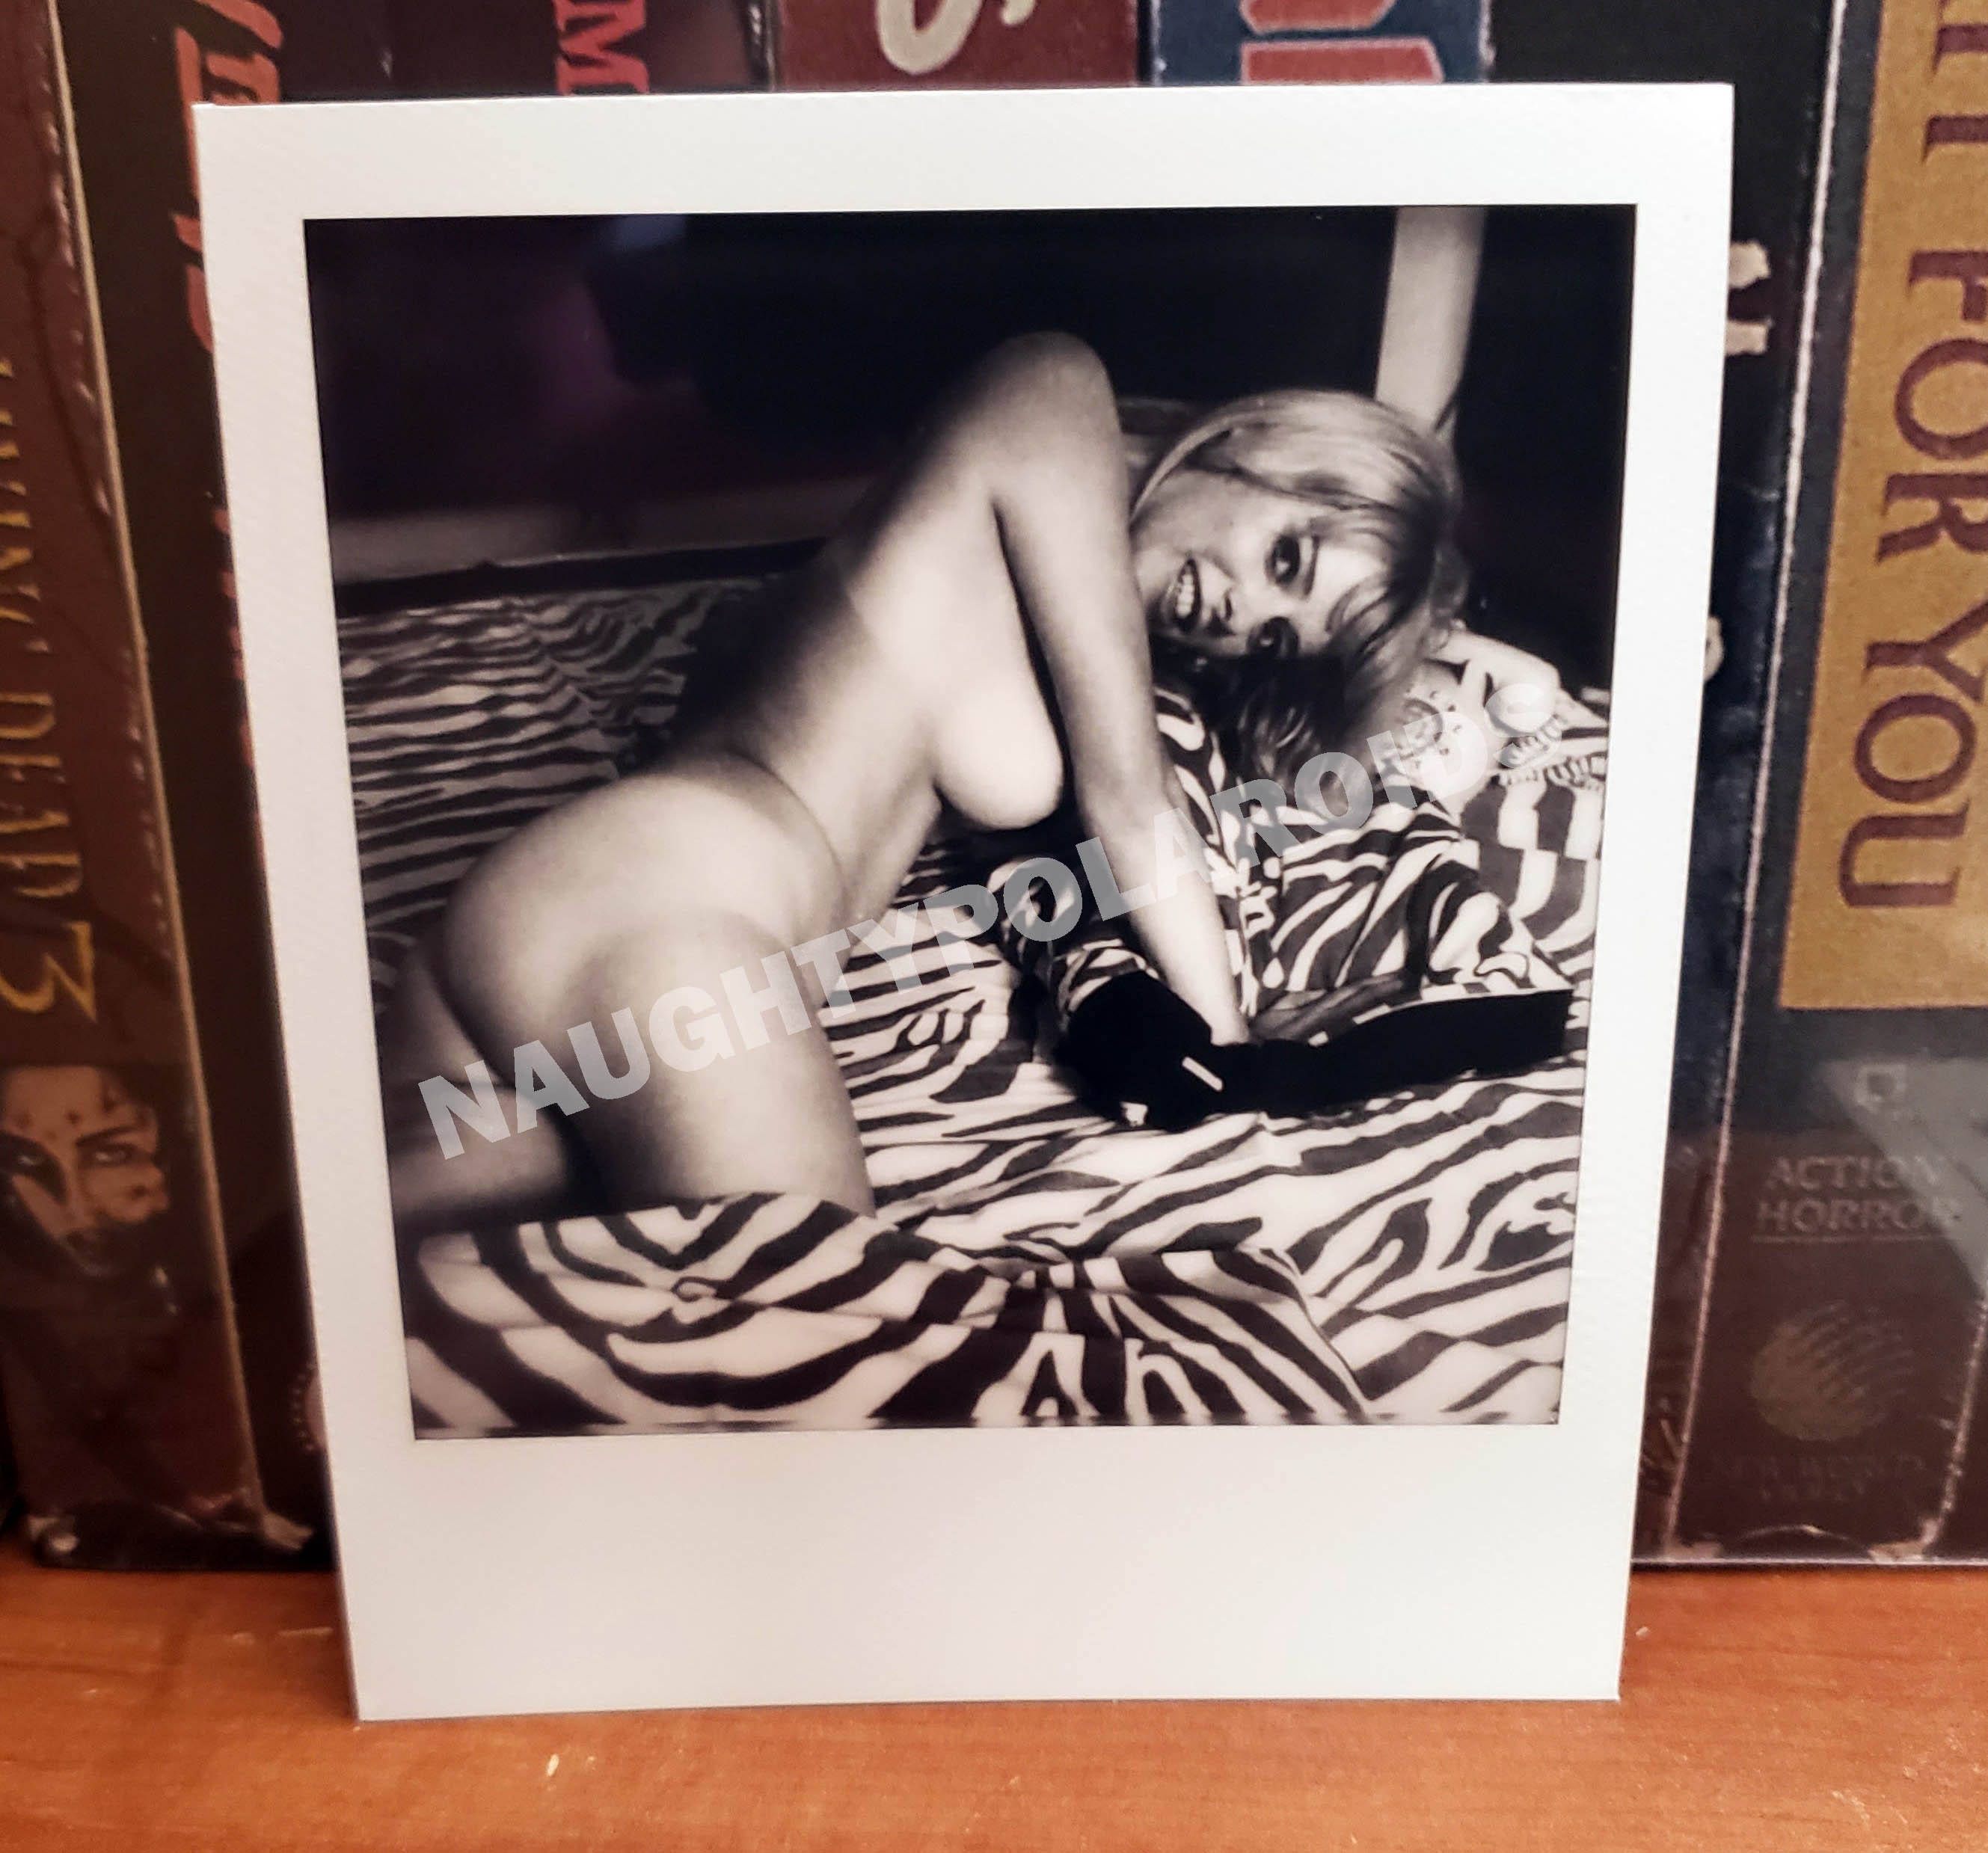 1960s Unknown Model Bedroom Snapshot REAL POLAROID PICTURE